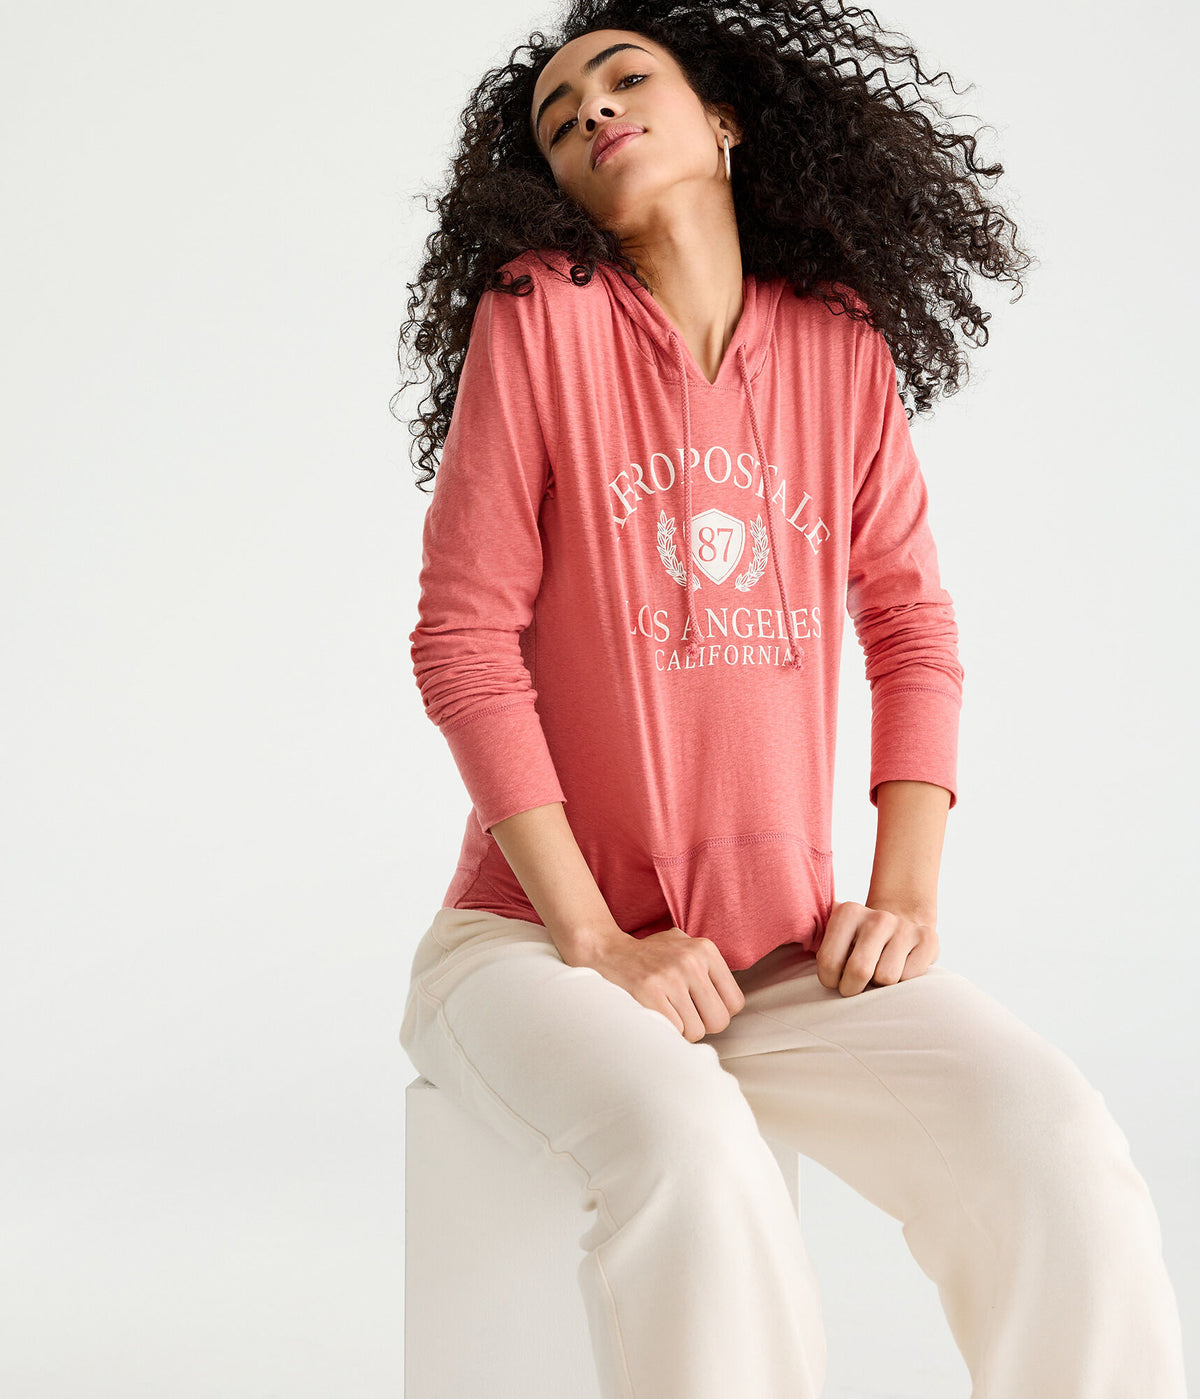 Aeropostale Womens' Long Sleeve Aeropostale Crest Hooded Graphic Tee - Light Red - Size S - Cotton - Teen Fashion & Clothing Red Hibiscus